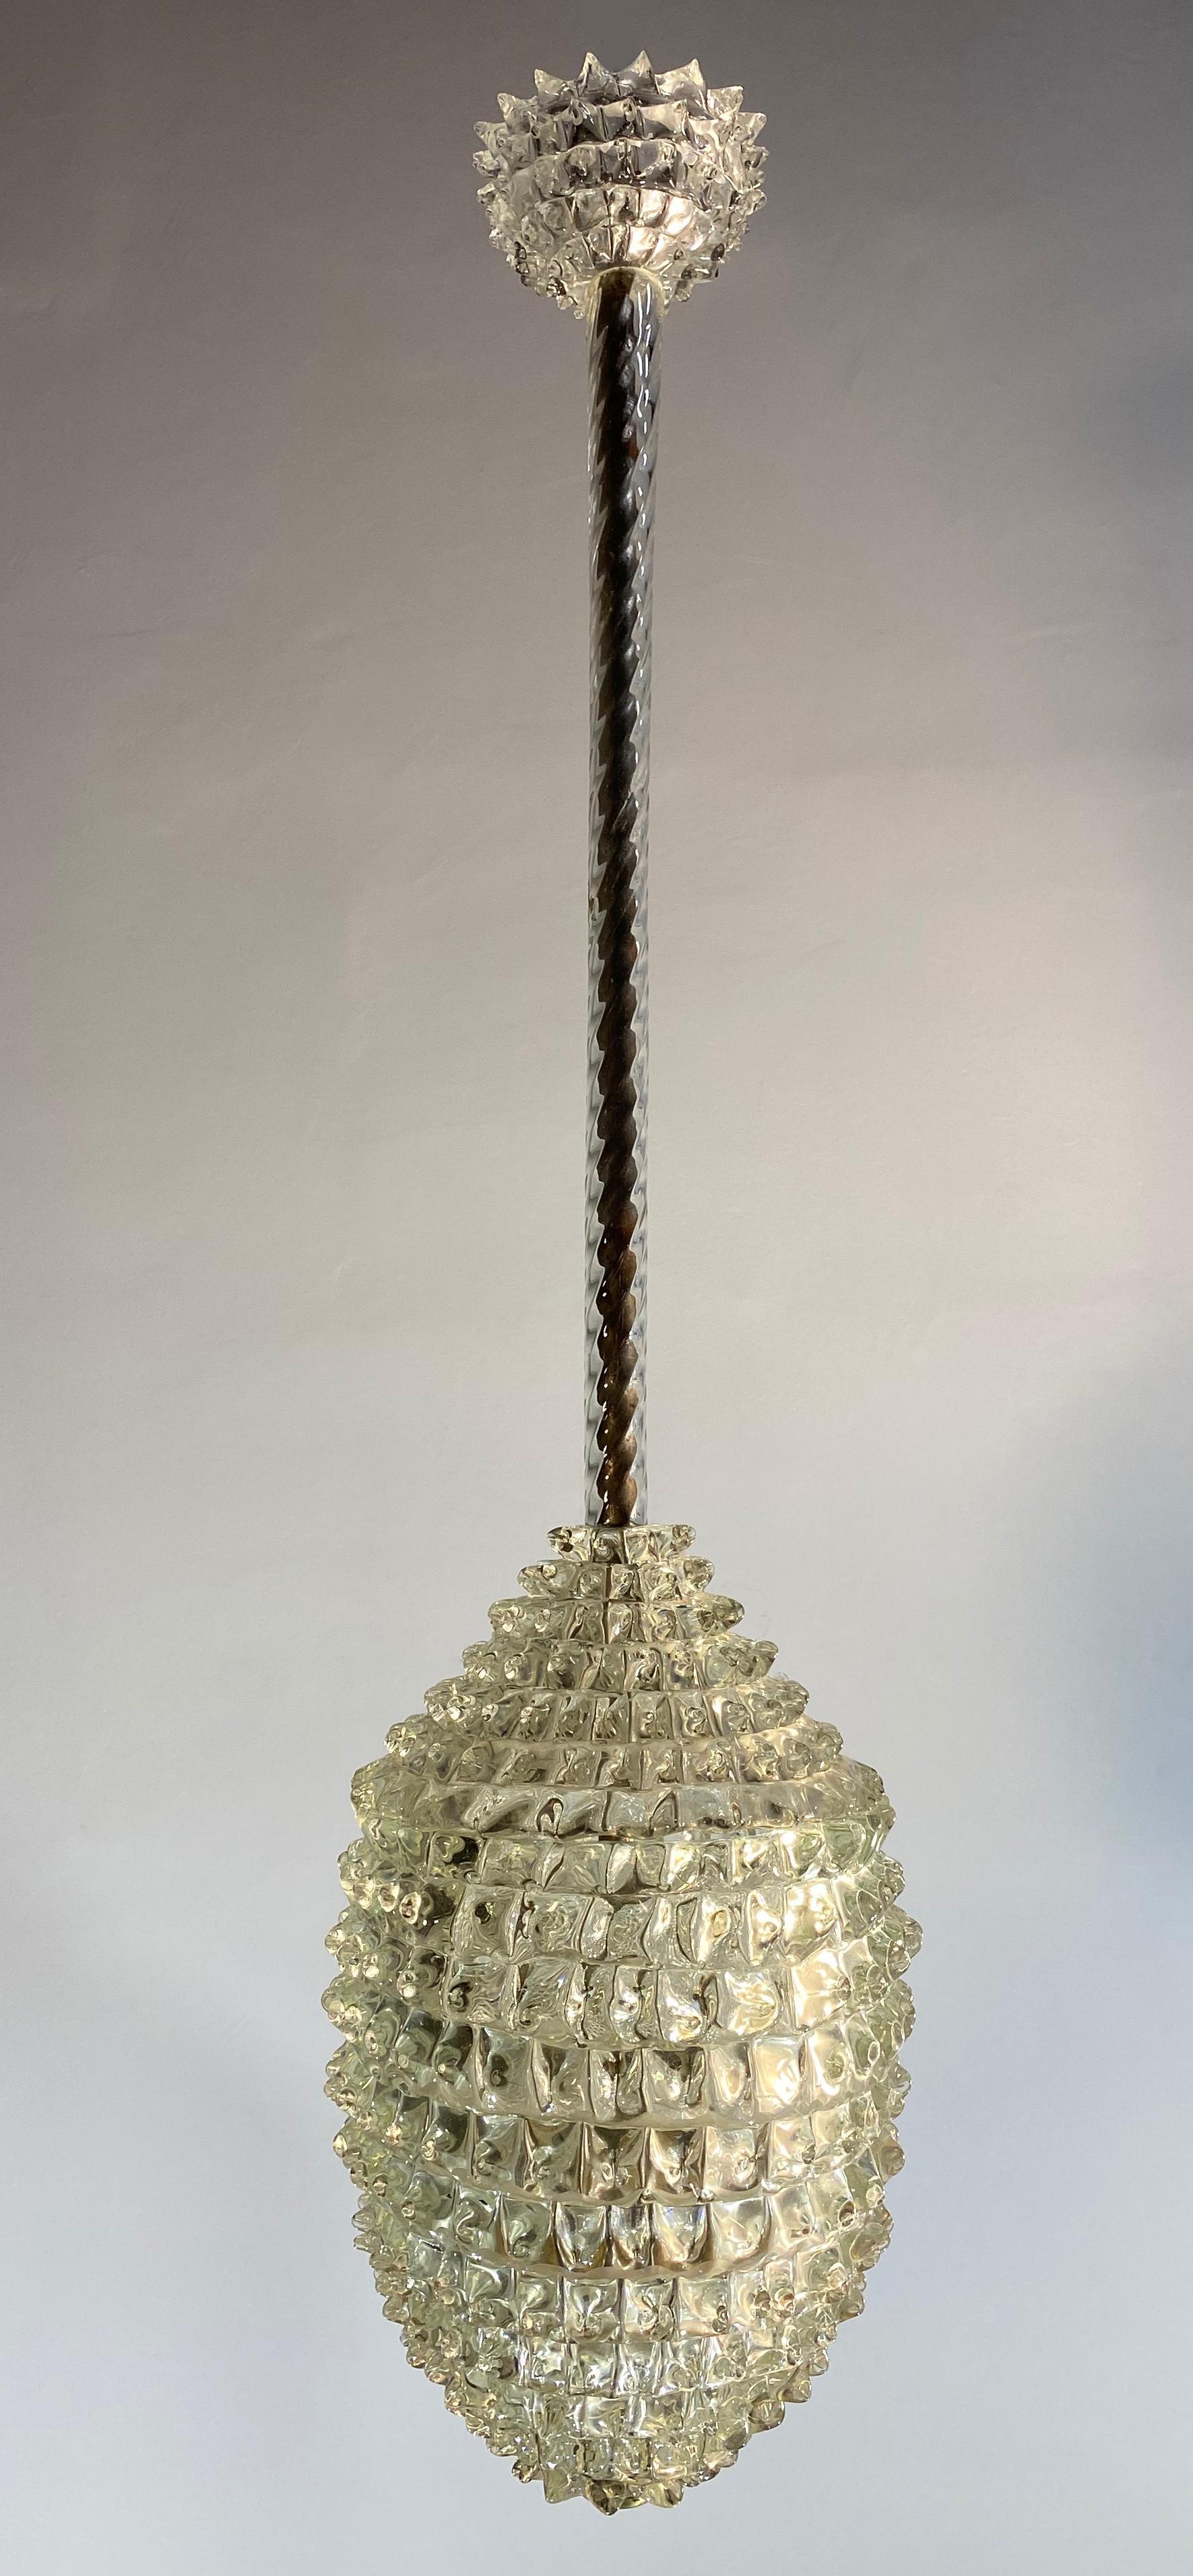 Original 1940s Murano glass pendant by Ercole Barovier made in the “rostrato” technique with iron and brass hardware.
No flaws, perfect holds three sockets each 70/100watt.